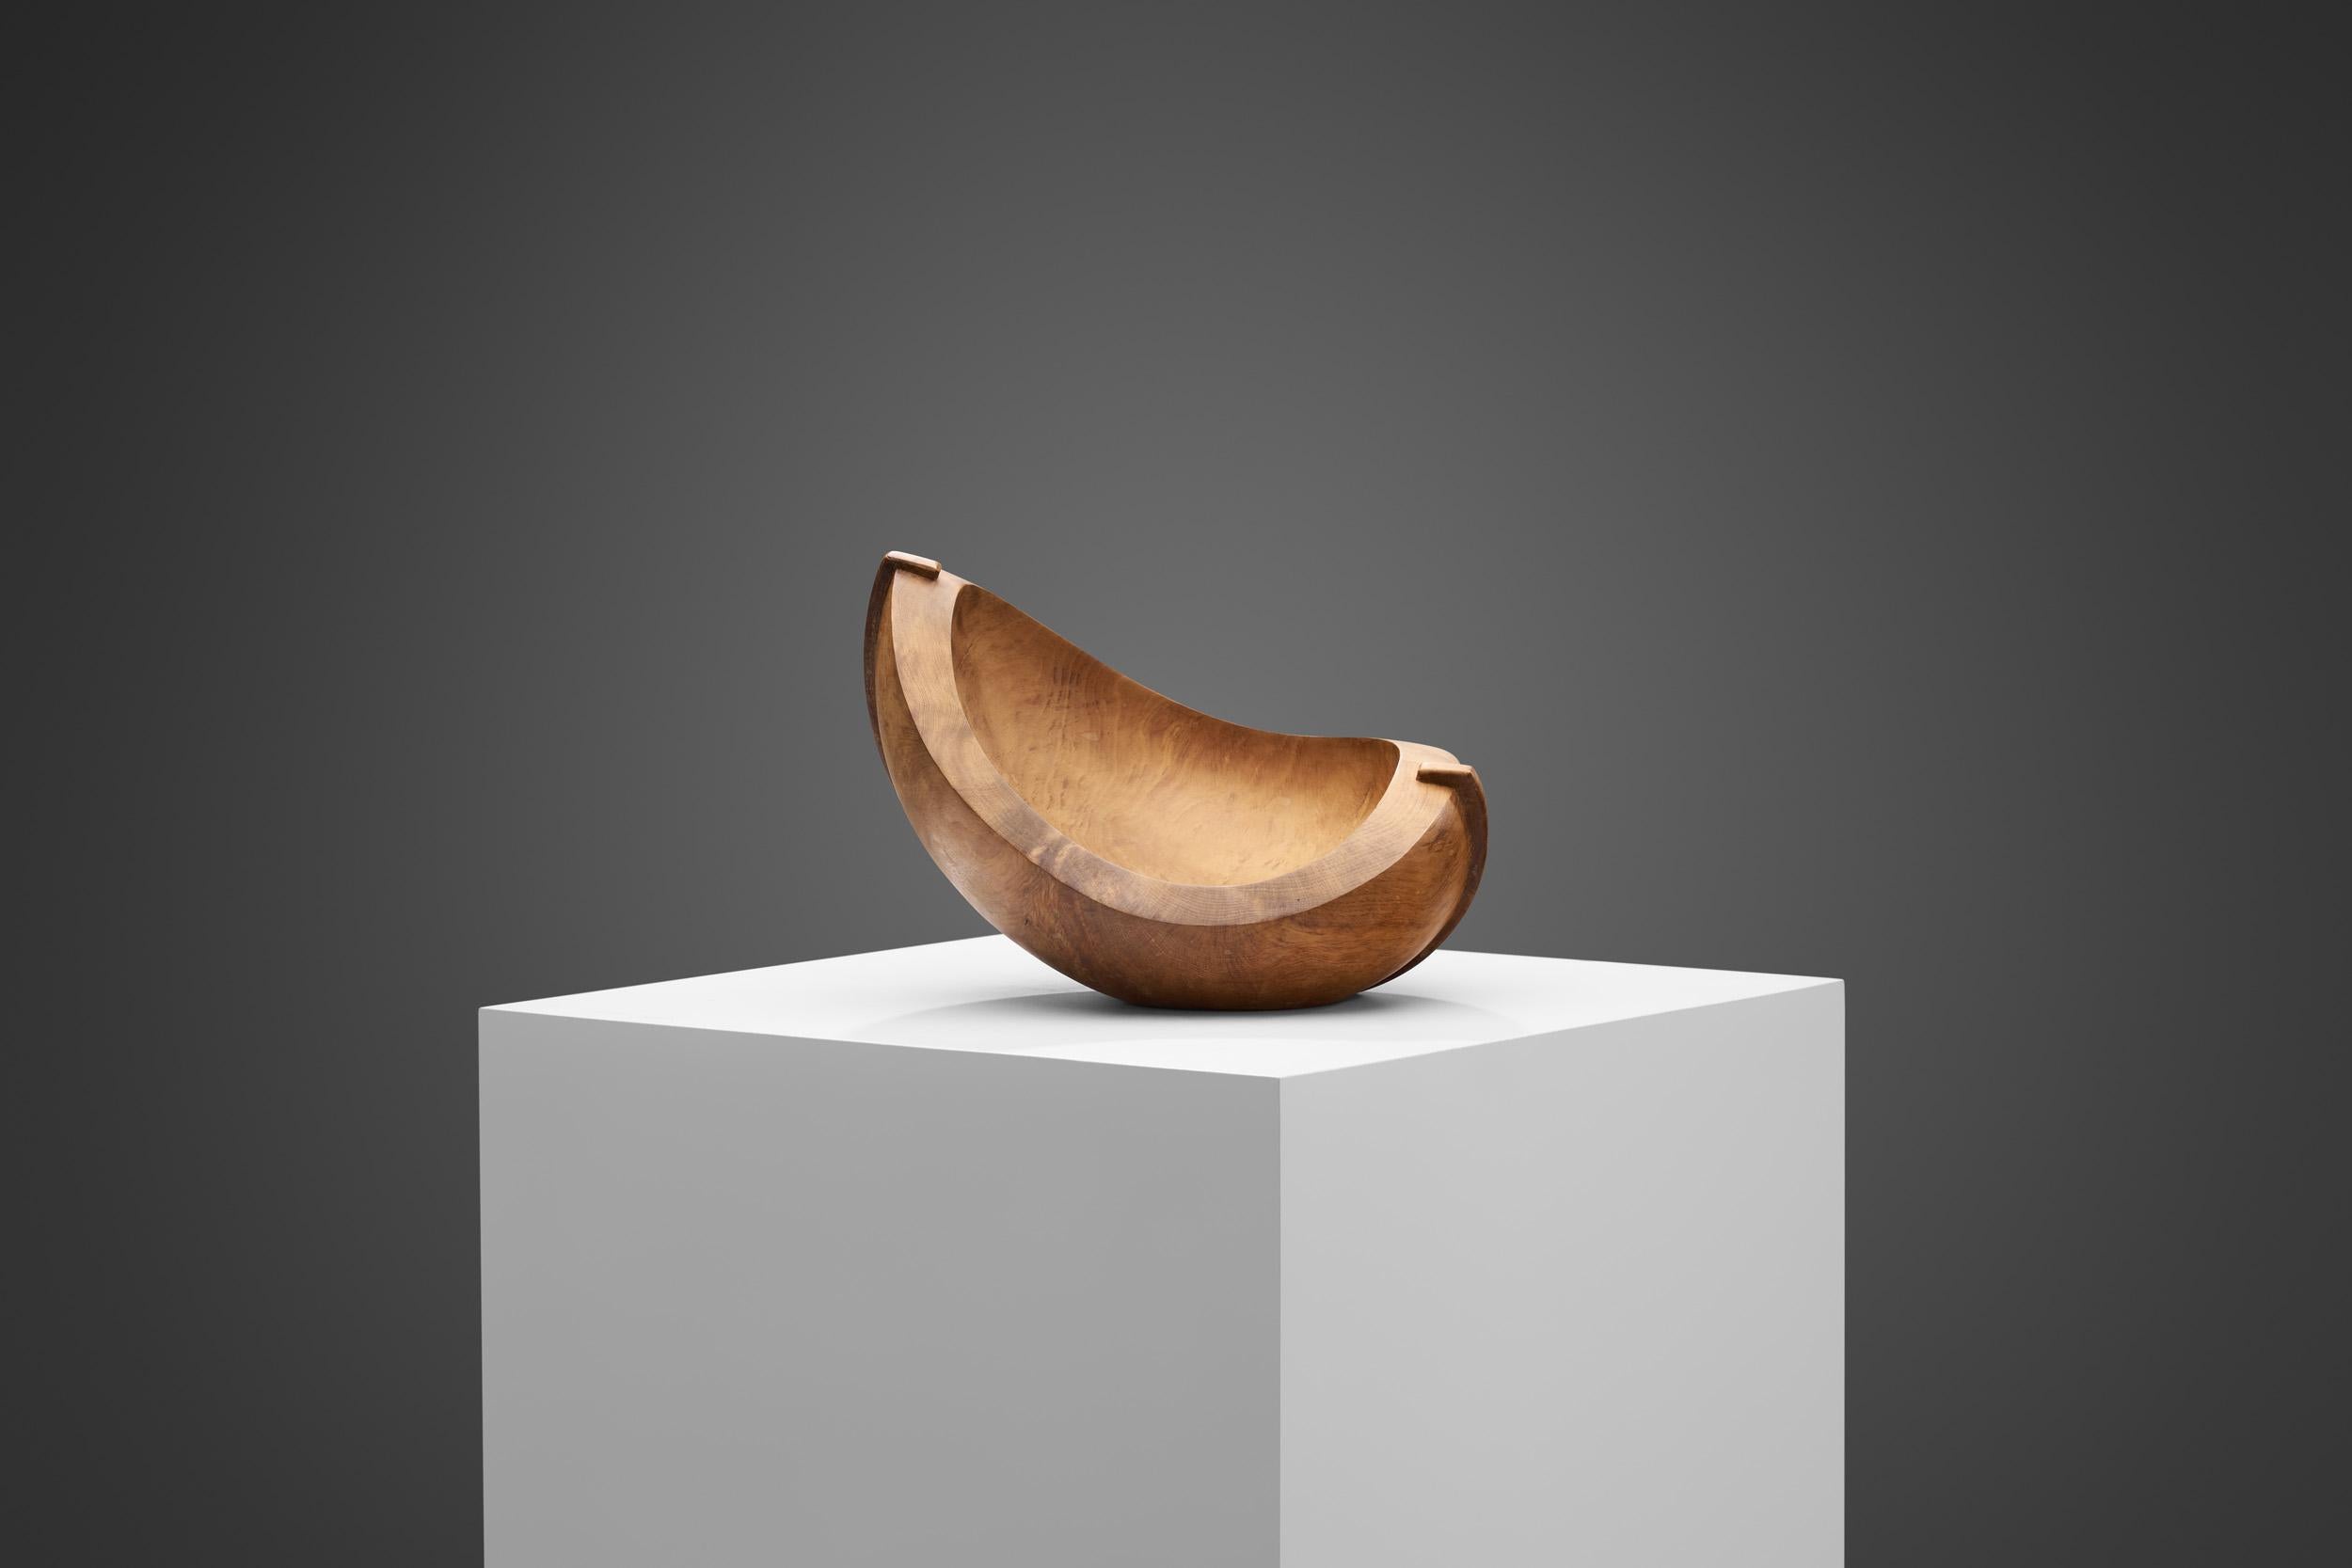 This one-off sculpture by Swedish designer, Roland Wilhelmsson, is a unique testament to his approach to, and philosophy of design. The design language of this sculpture is stylistically closer to the organic elegance of modernism than the